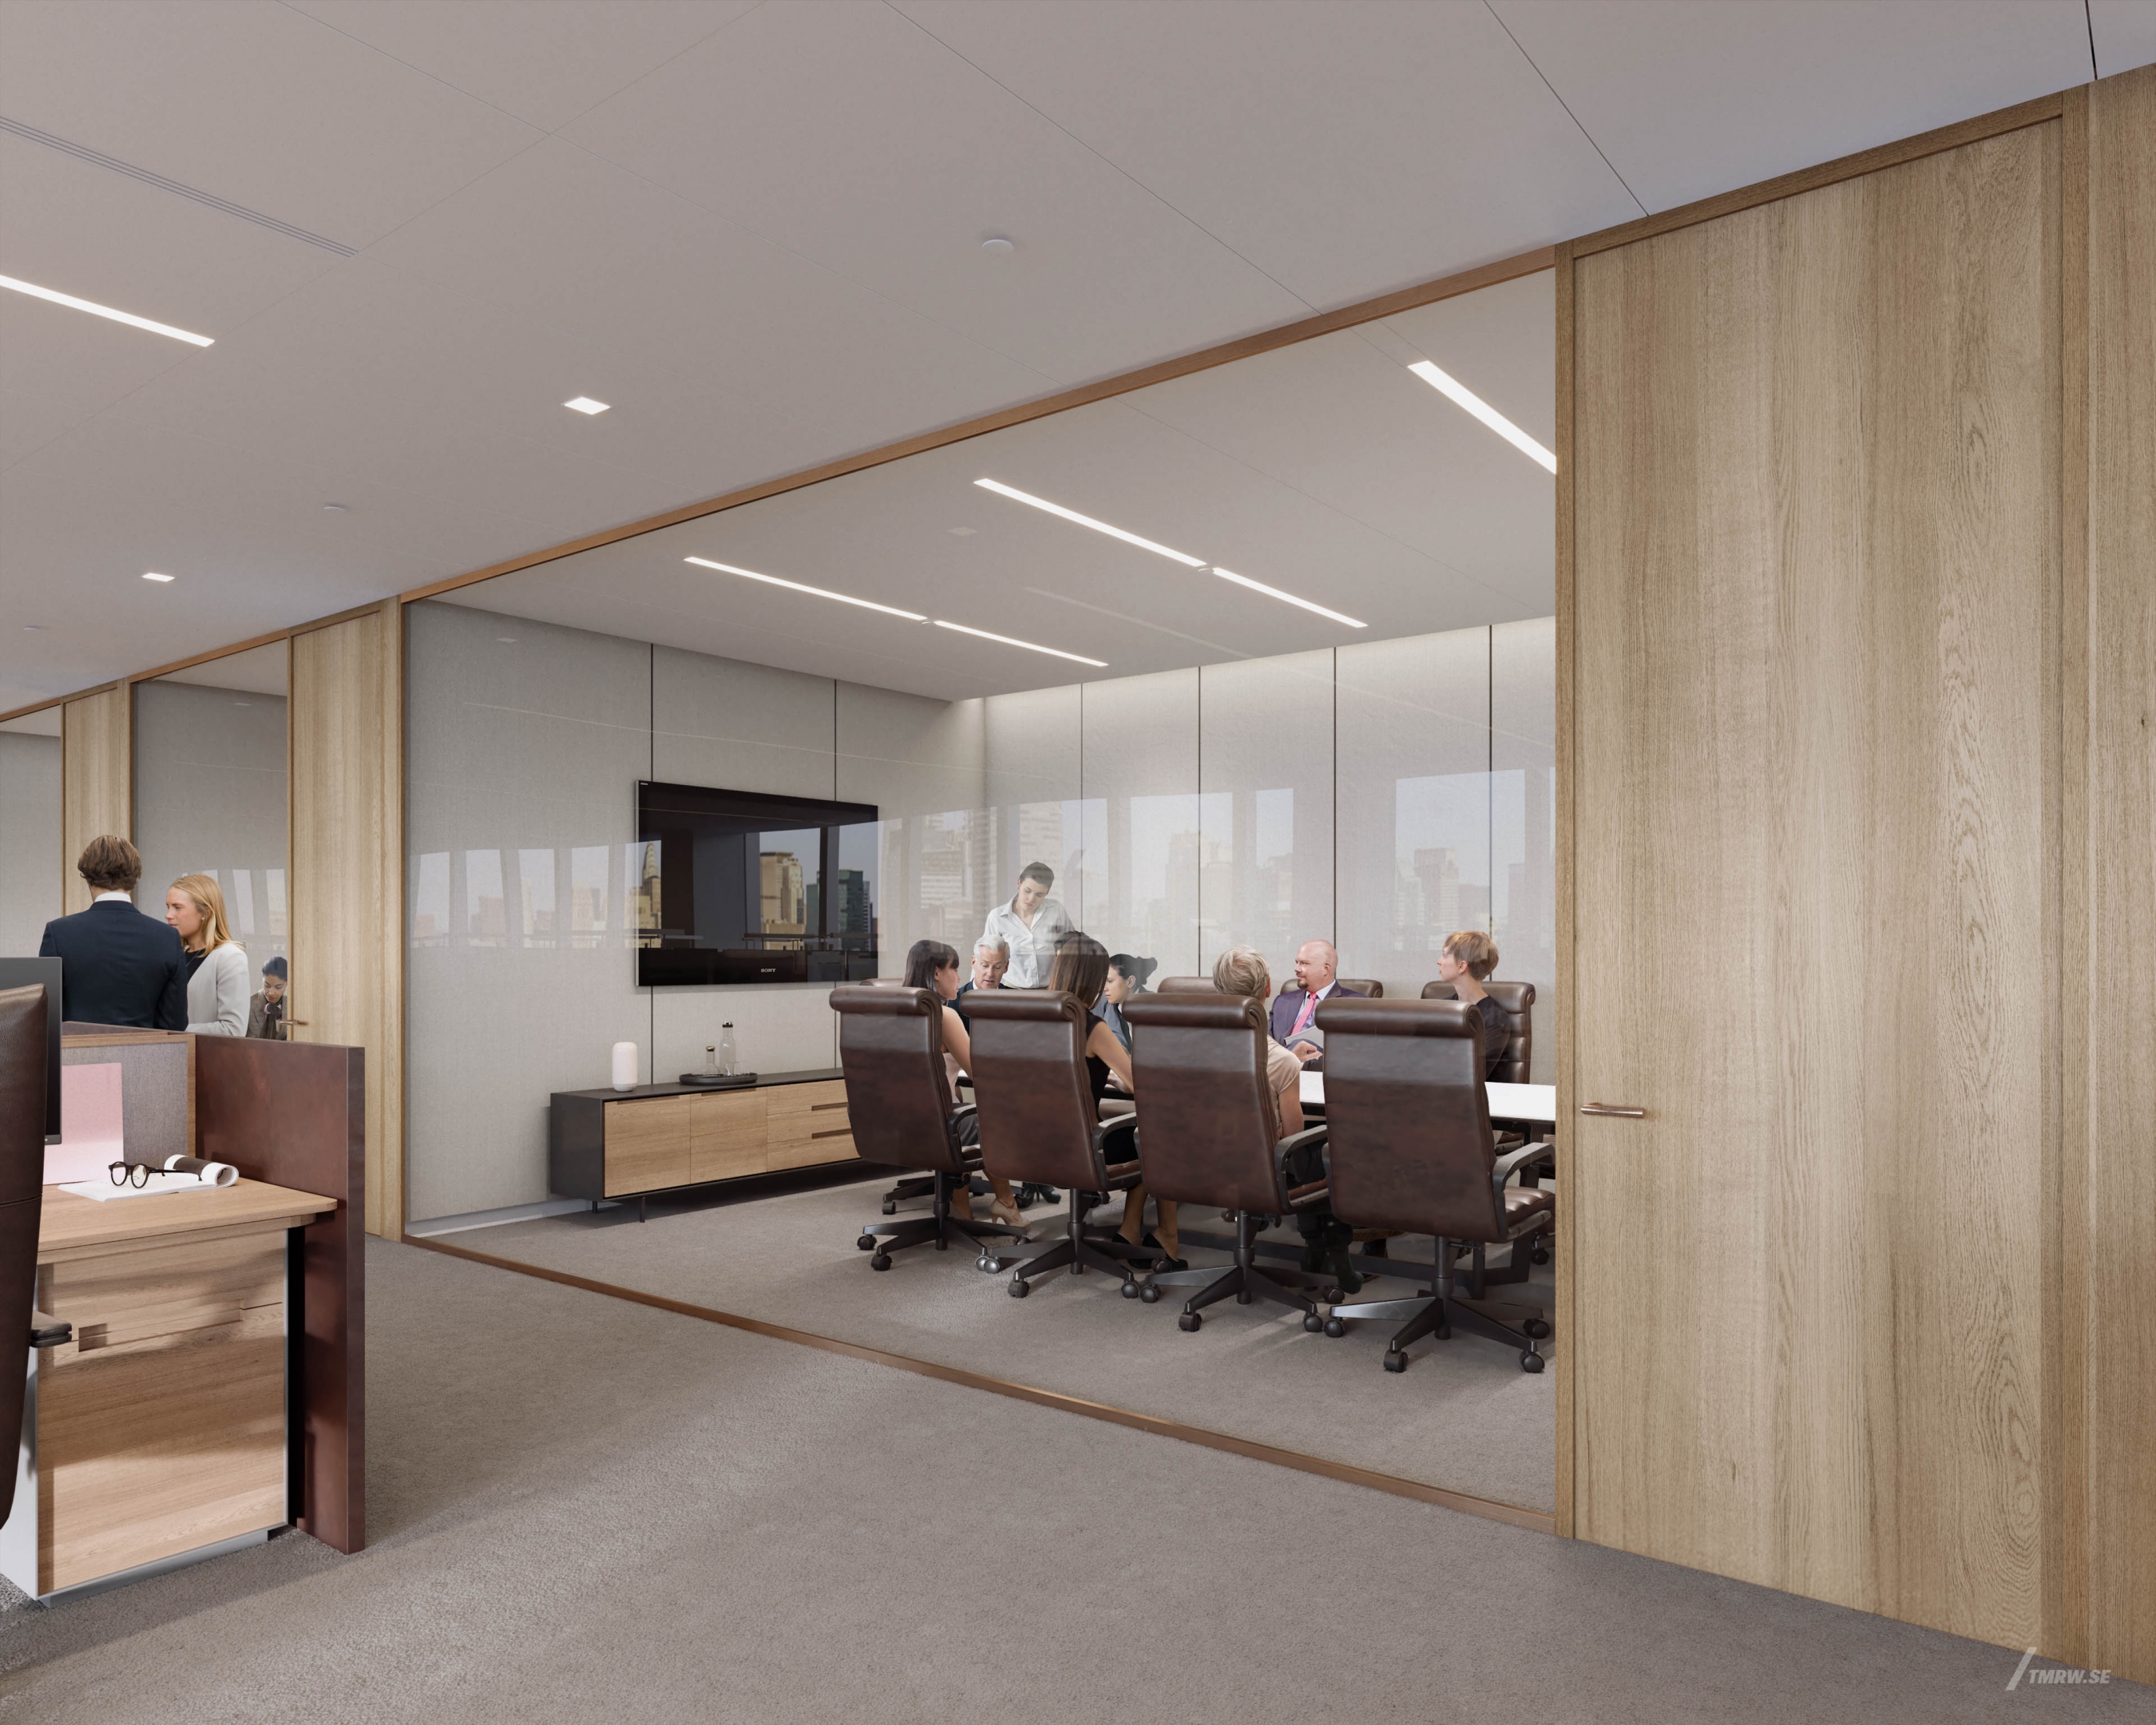 Architectural visualization of KKR for HLW, an office area daylight from an interior view.